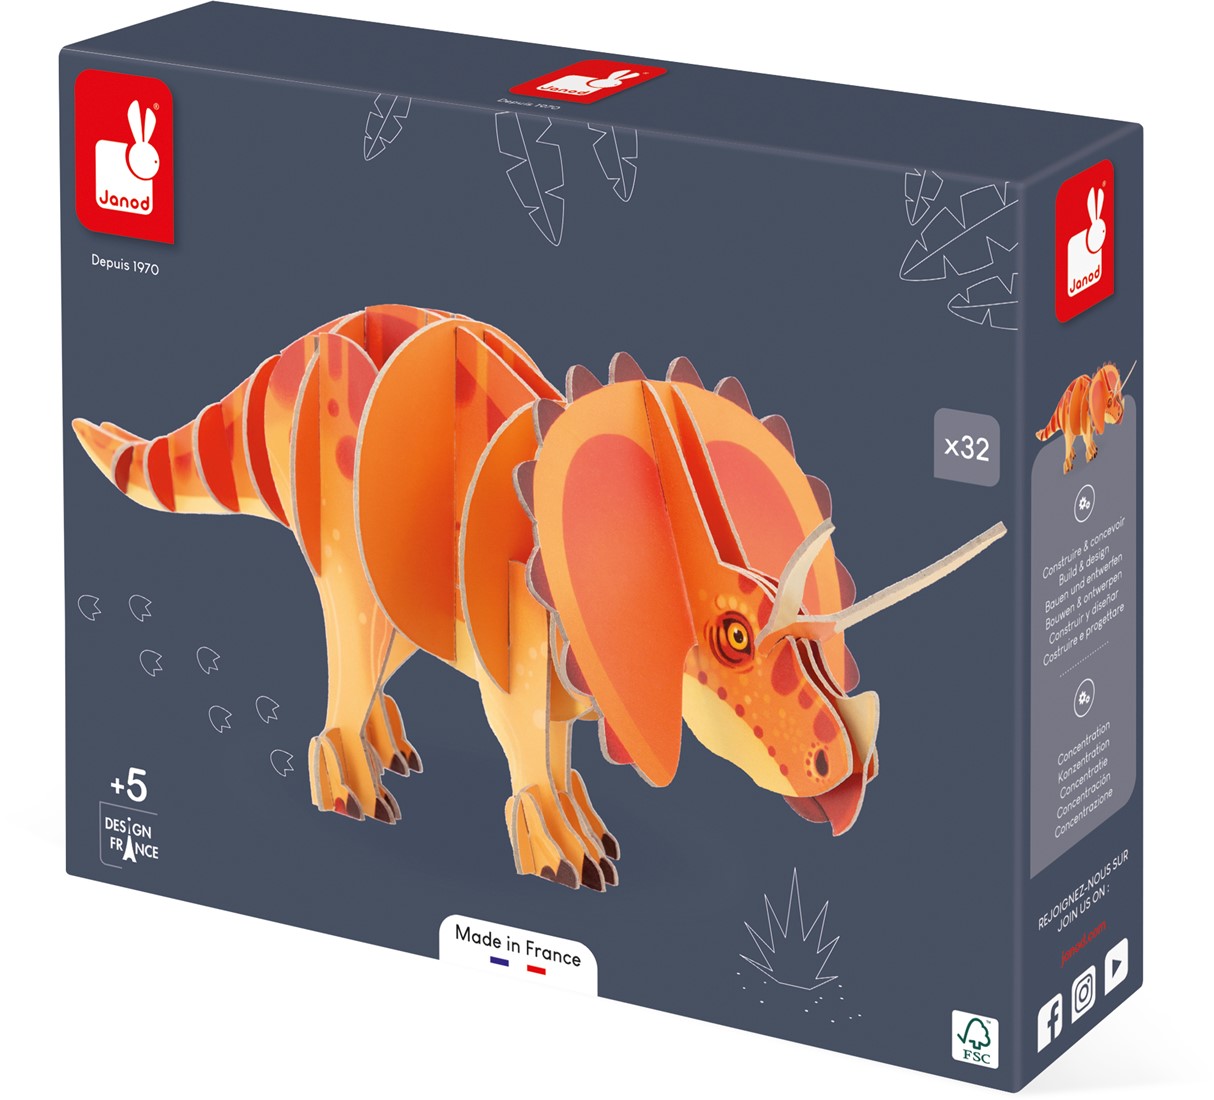 Janod Dino 3D puzzle Triceratops